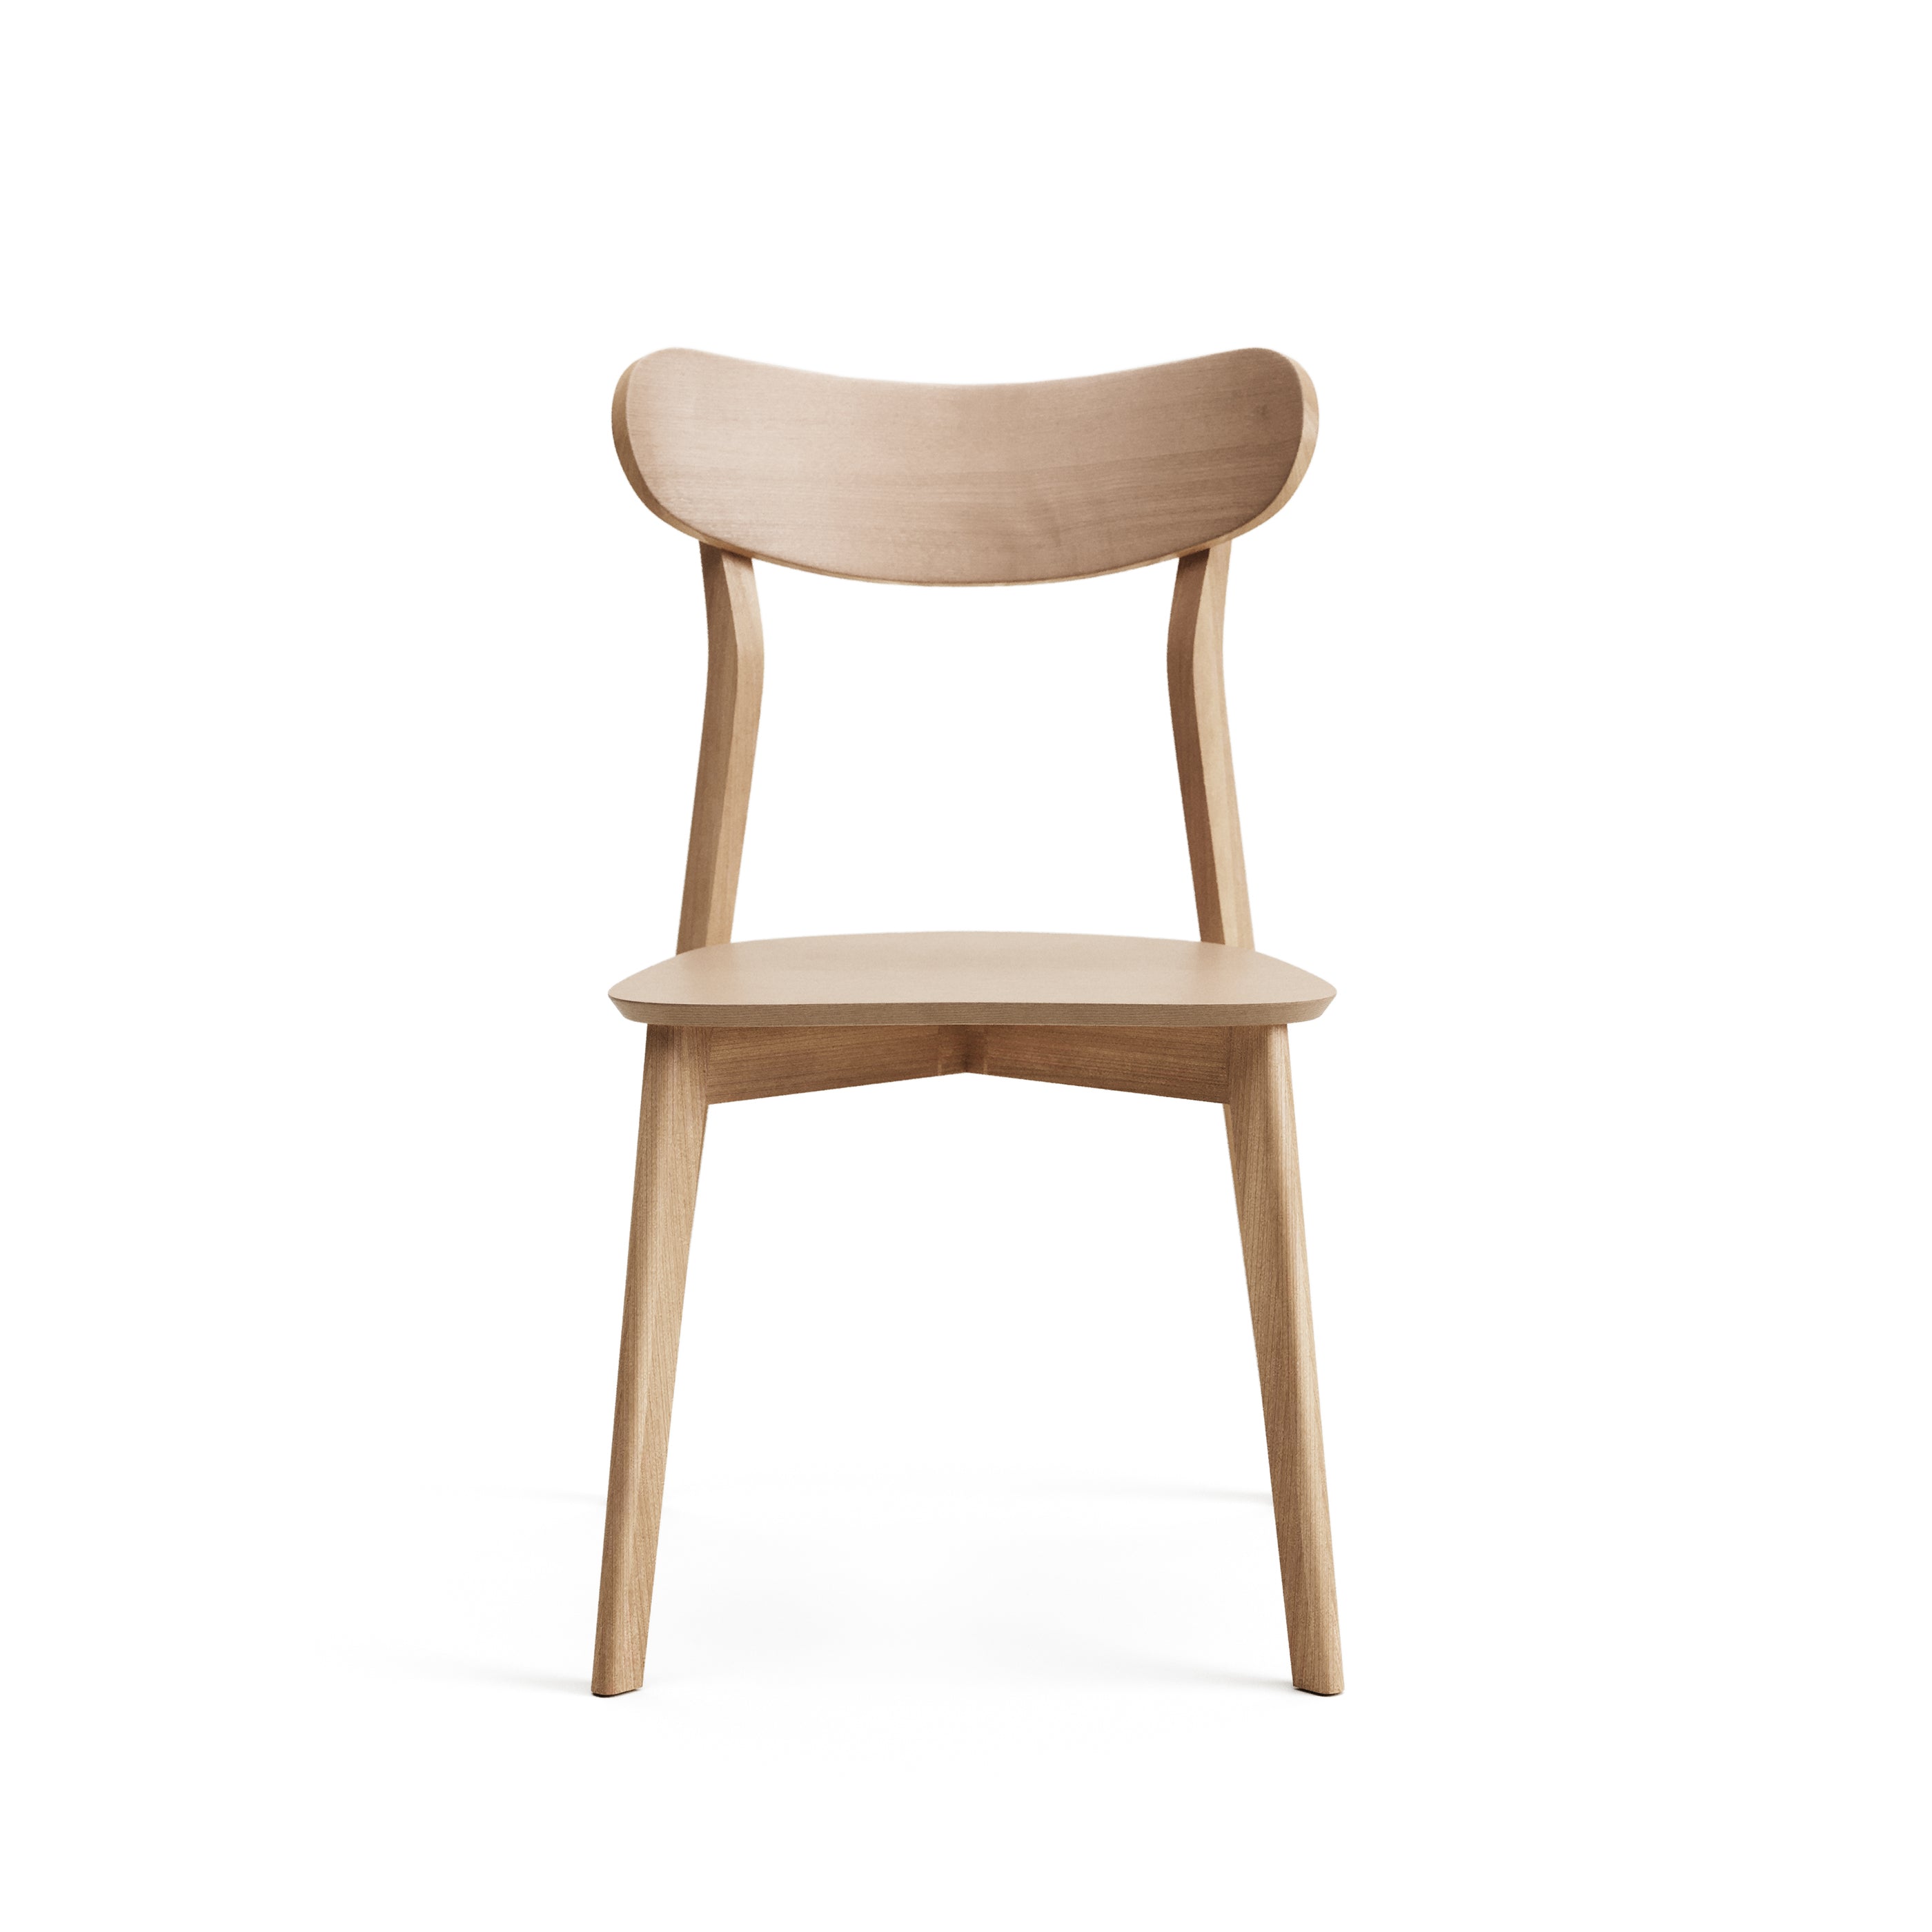 Safina chair in oak veneer and solid rubber wood